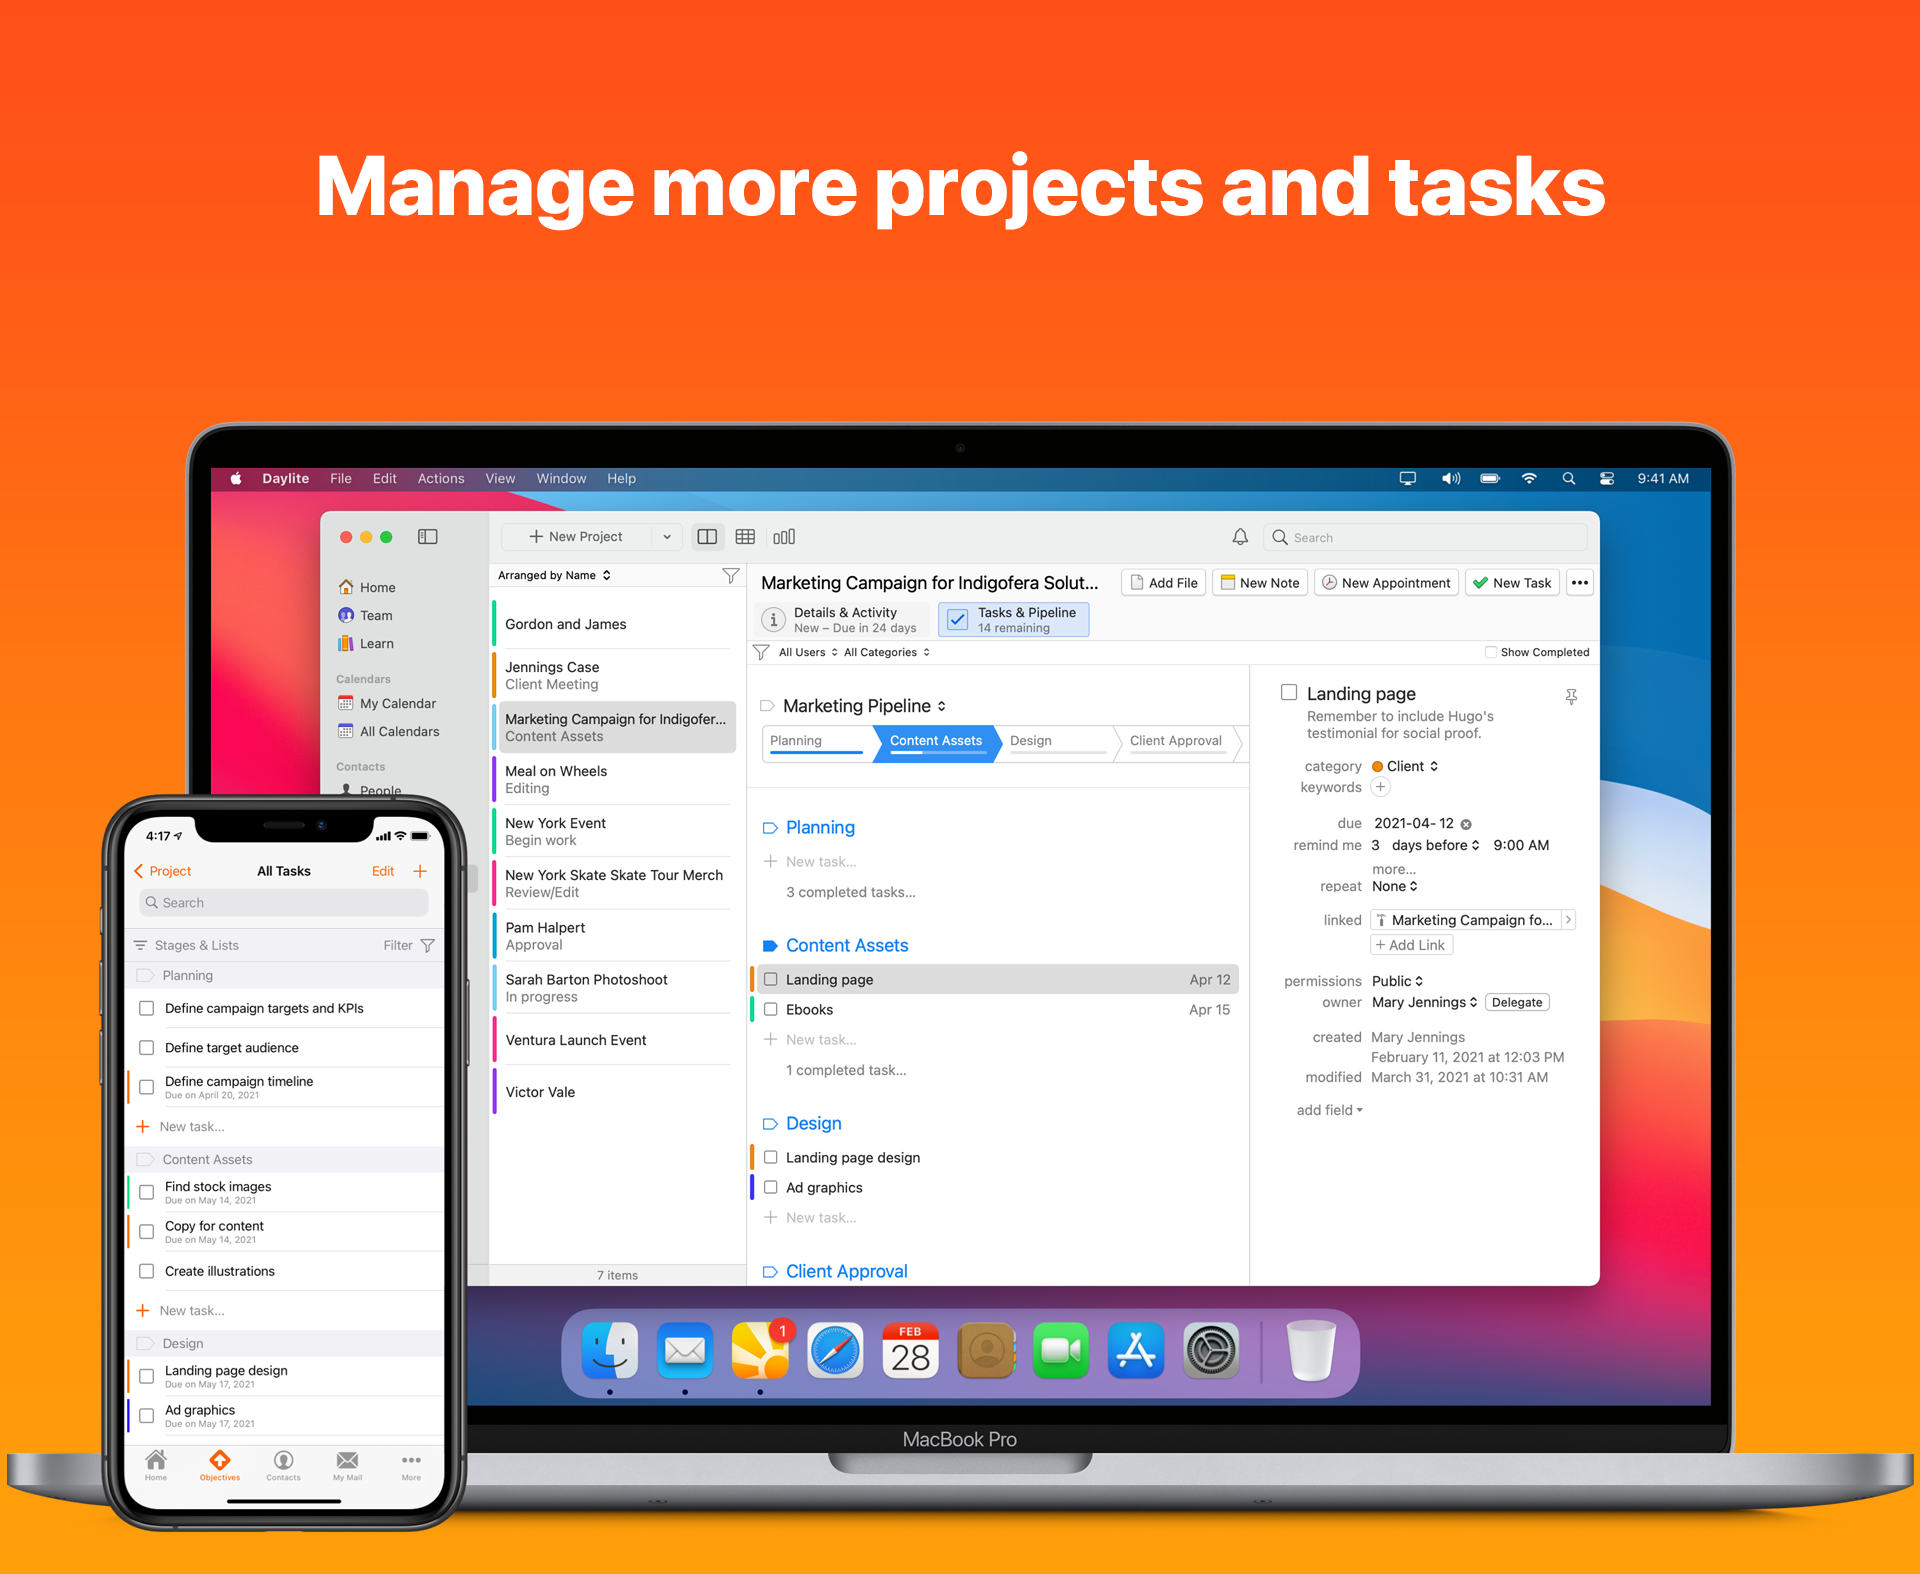 Browser and phone app open to Daylite by Marketcircle - CRM and Project management software for remote teams